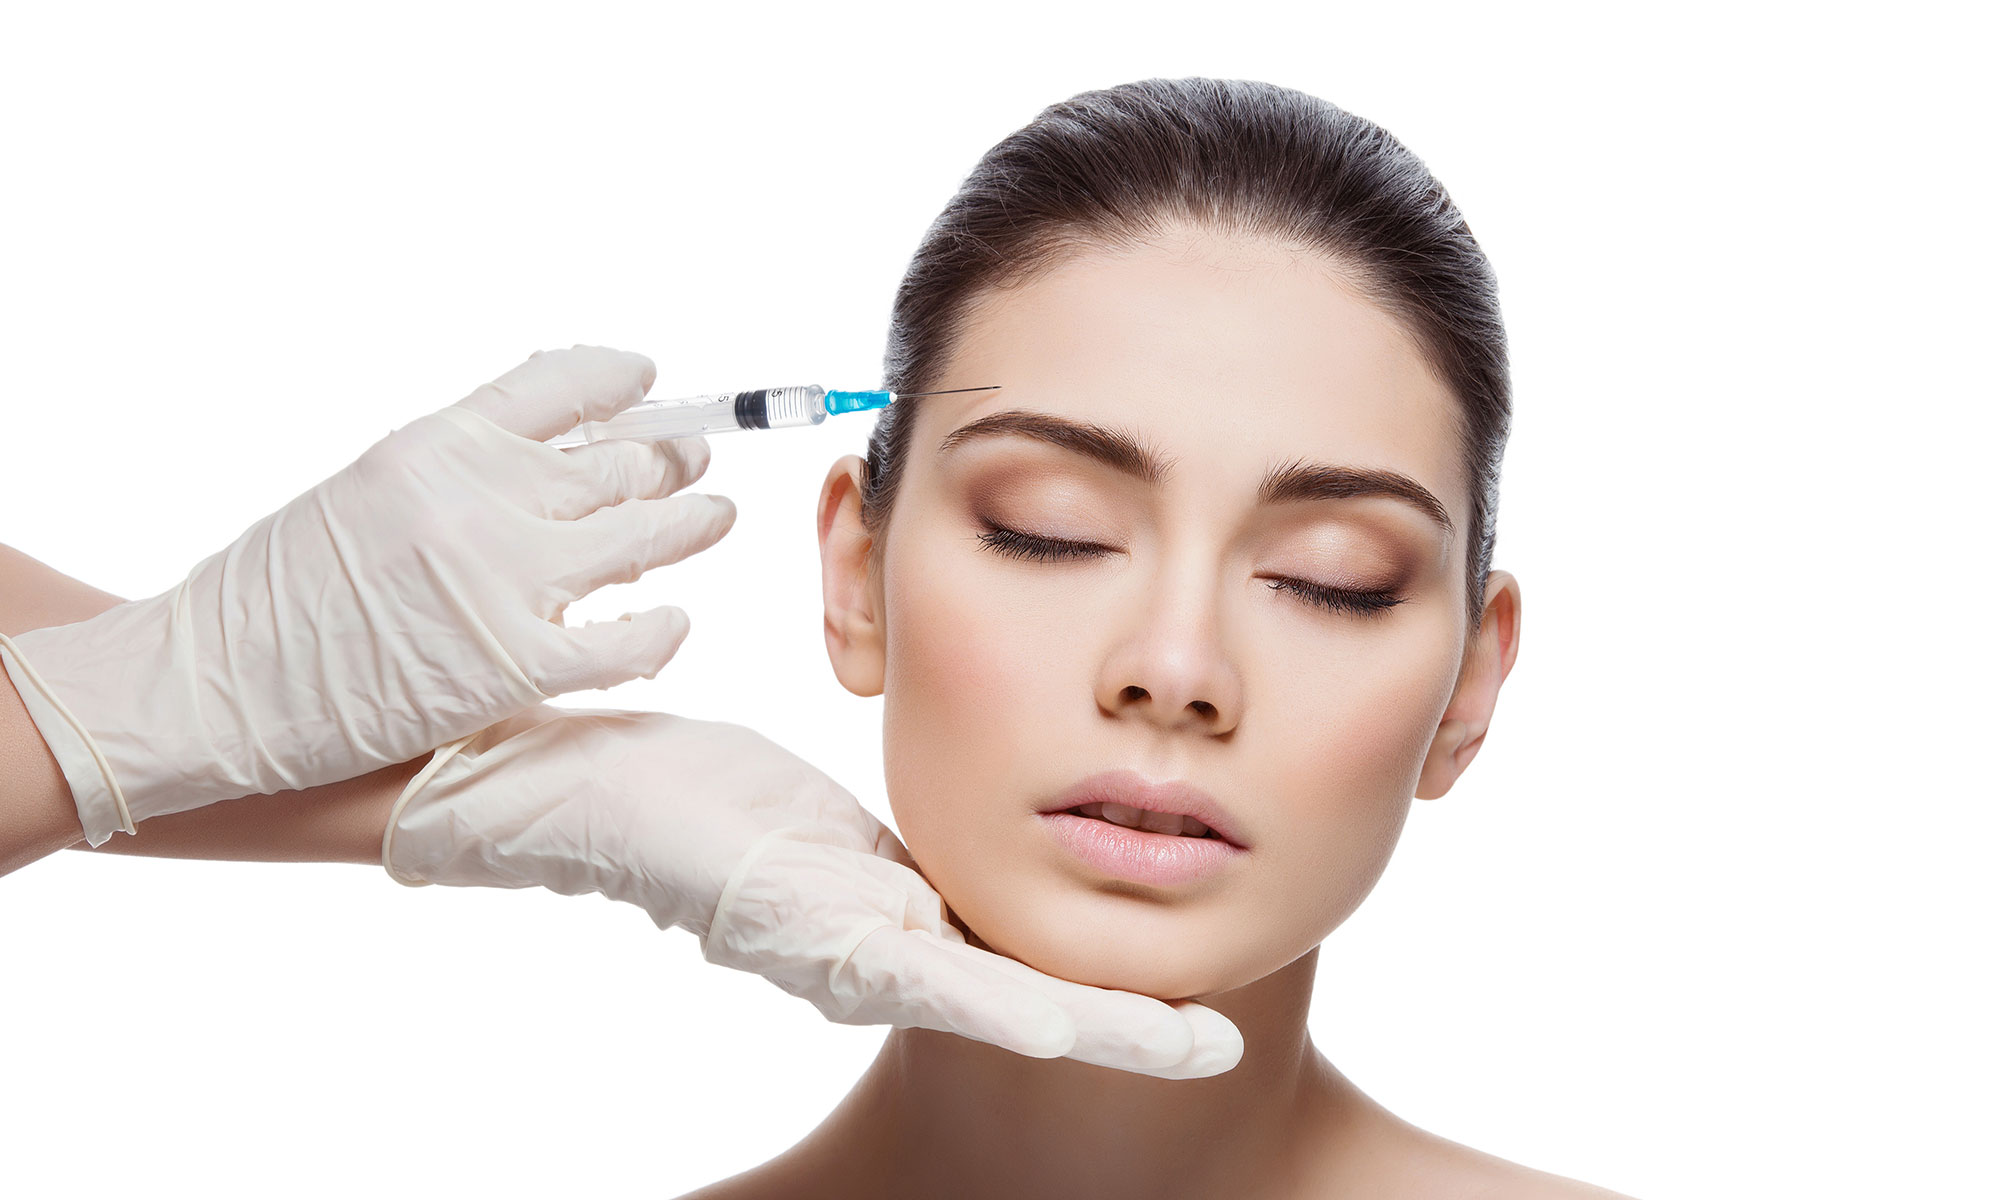 Botox Certification Courses
How to get certified in Botox Injections